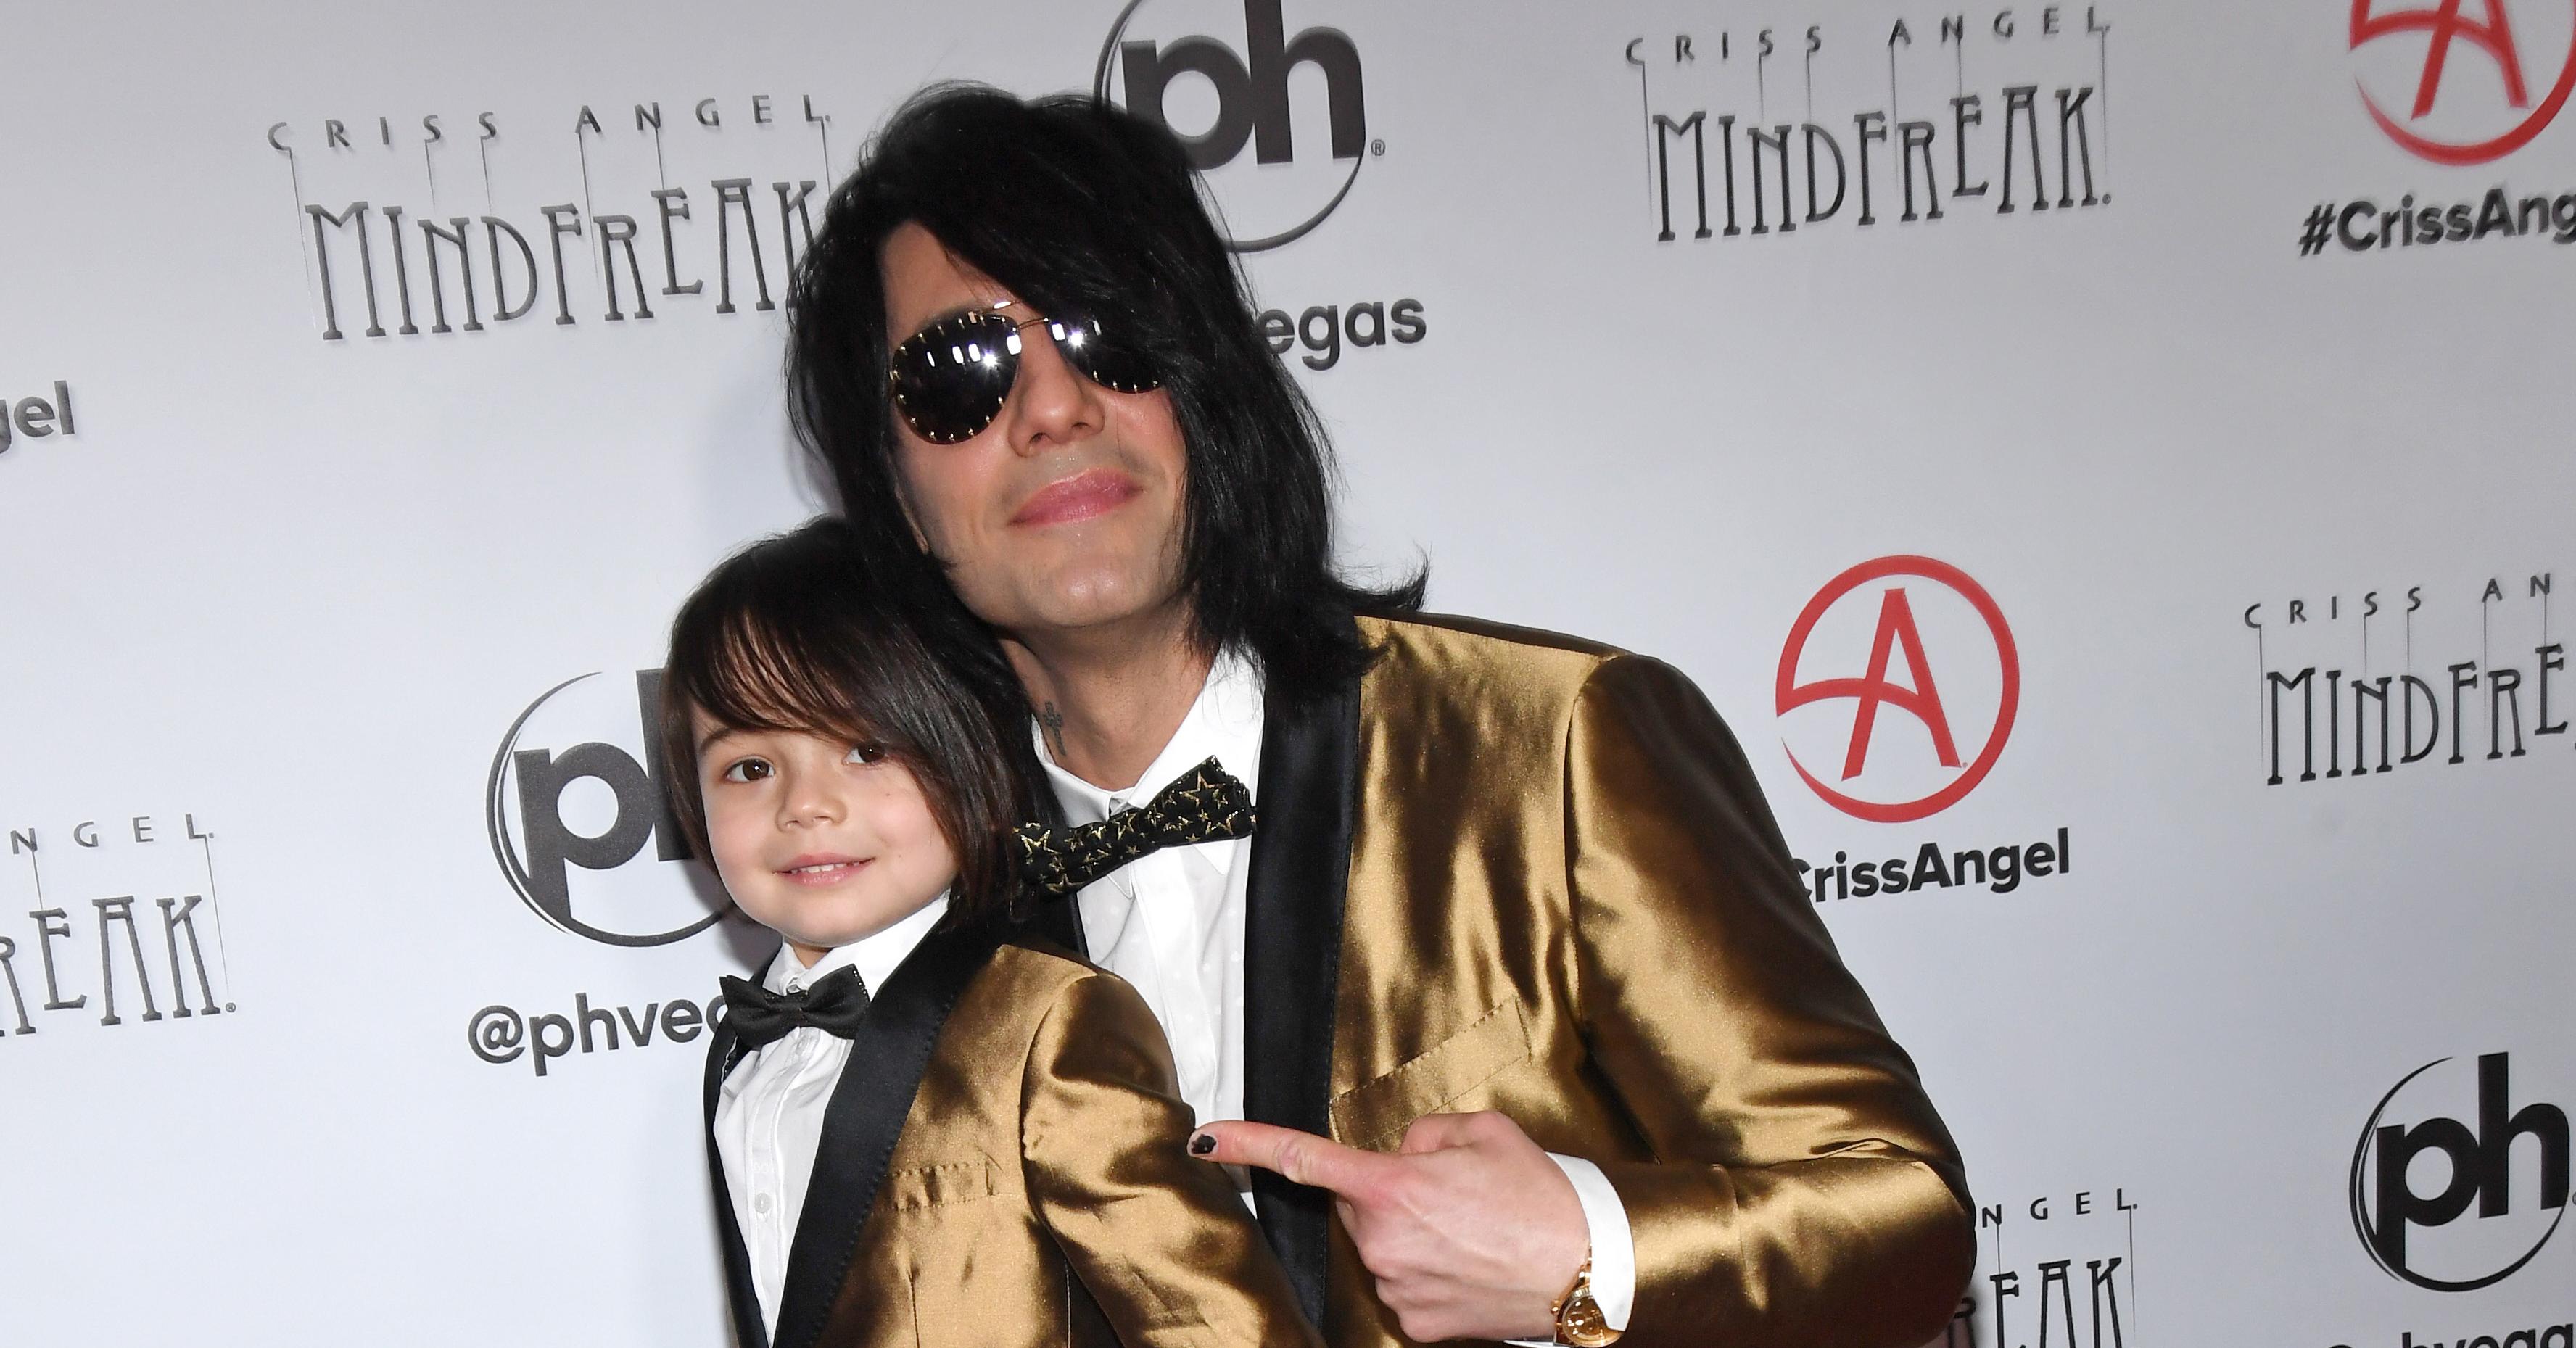 Criss Angel and his son Johnny